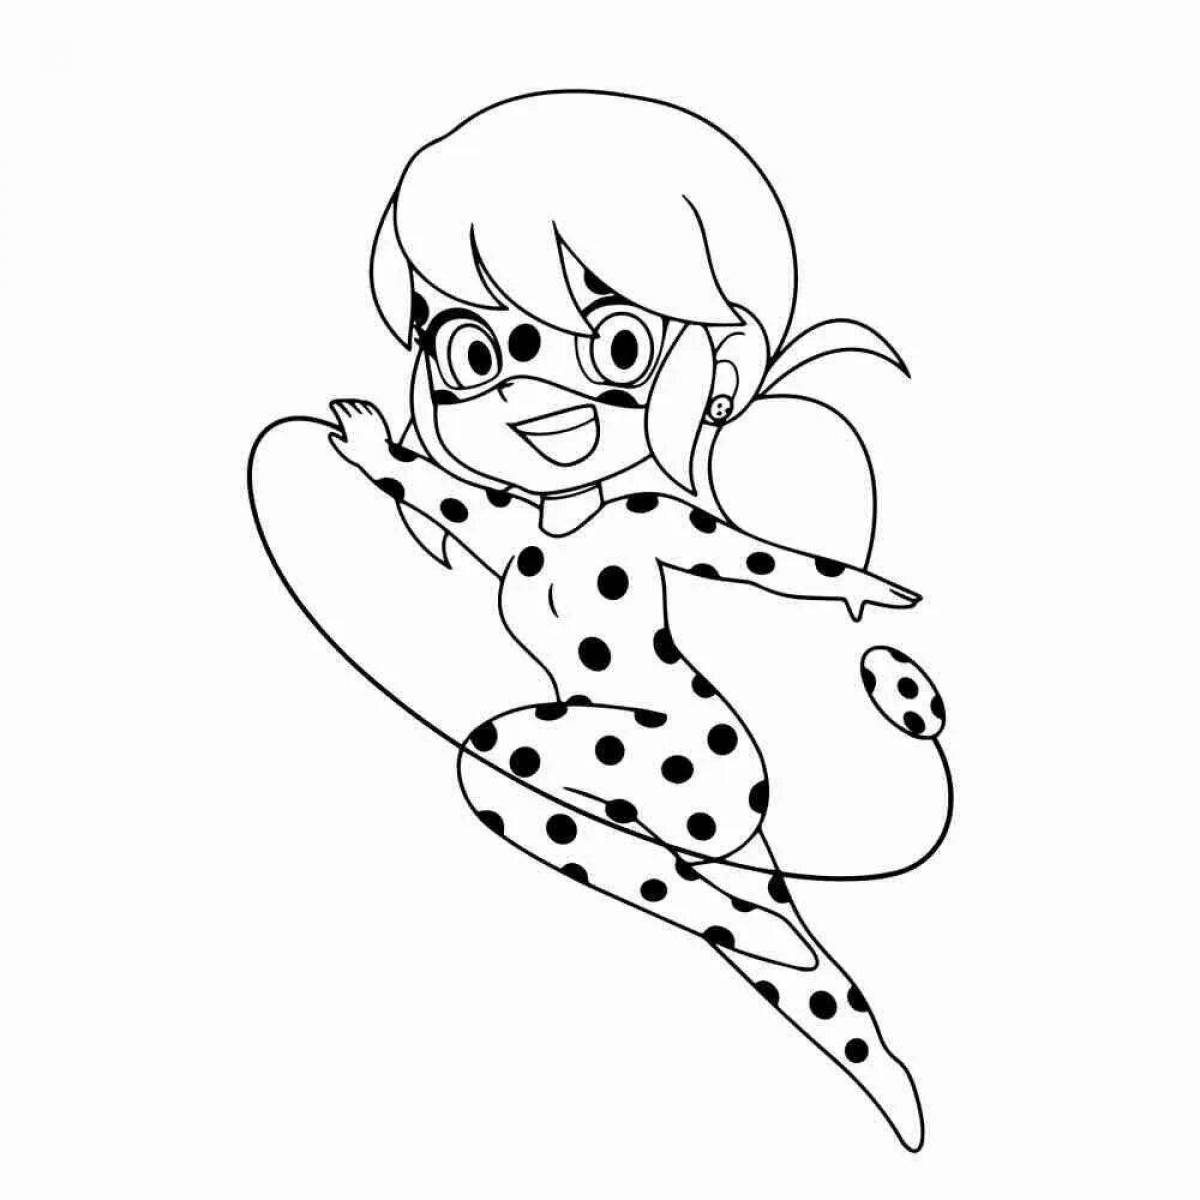 Funny ladybug coloring pages